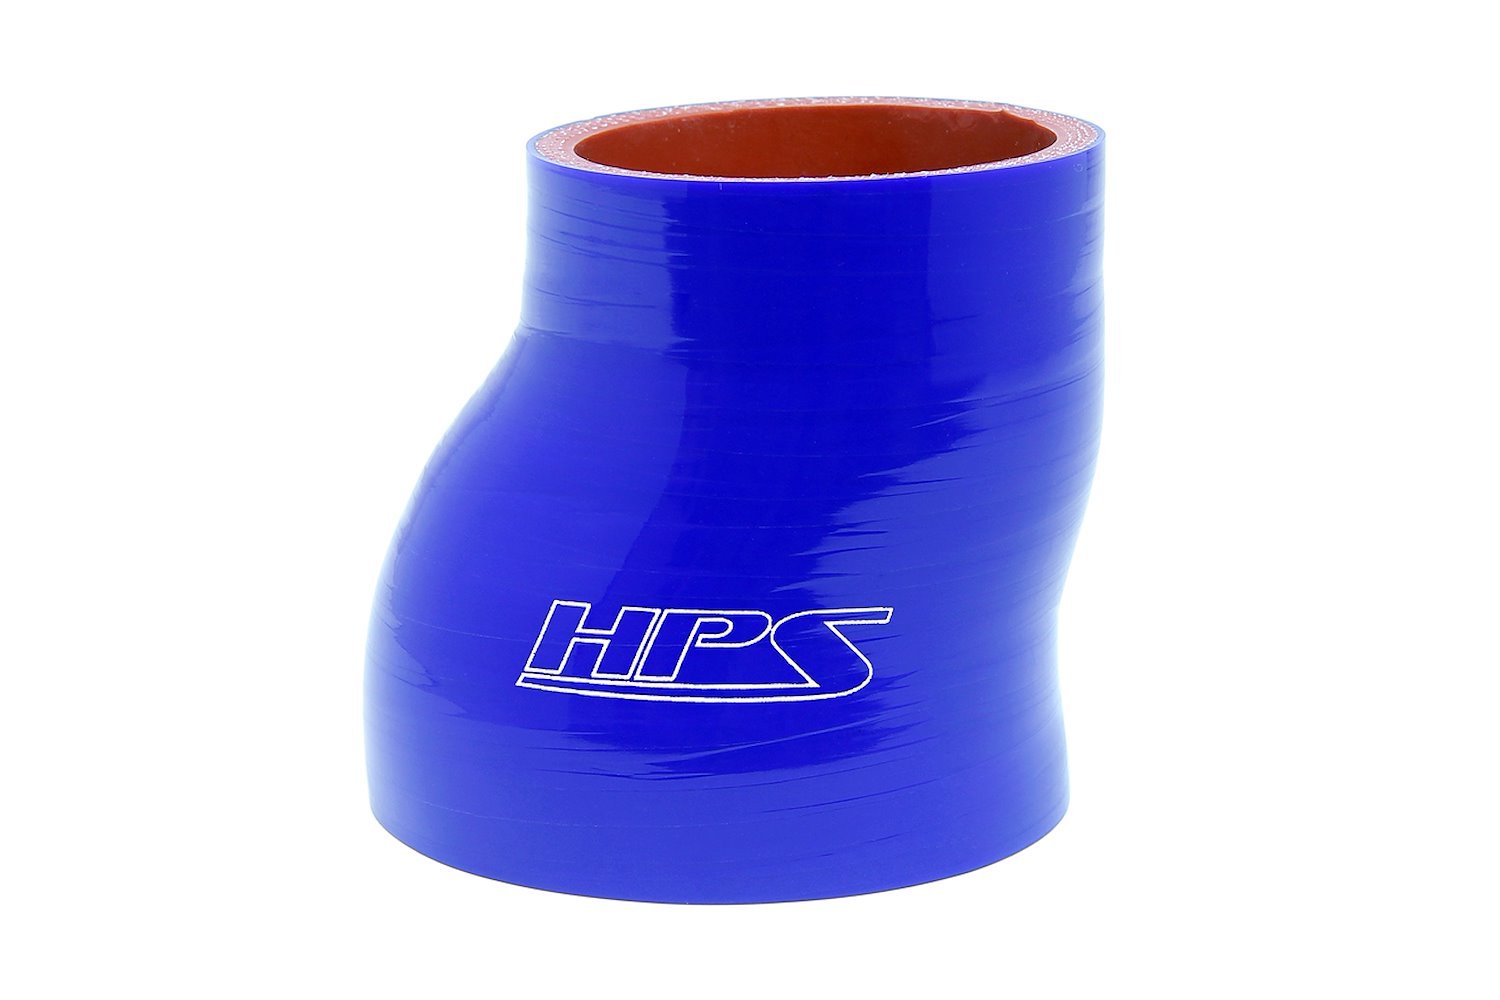 HTSOR-300-350-BLUE Silicone Offset Reducer Hose, High-Temp Reinforced, 3 in. - 3-1/2 in. ID, 3 in. Long, Blue